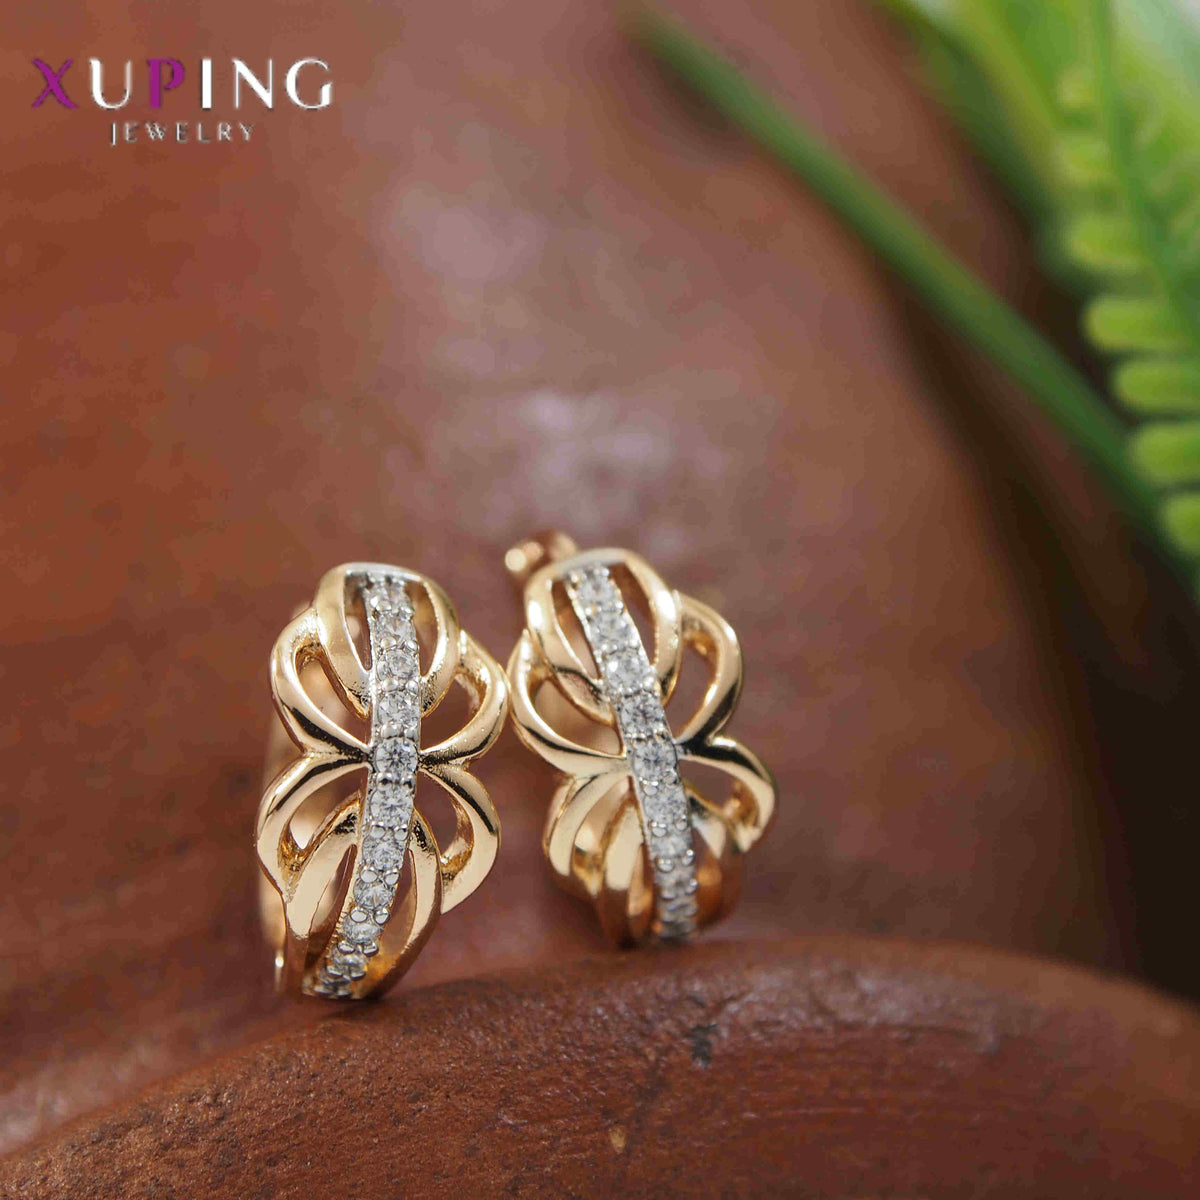 Gold Plated Unique Designed Xuping Earring- XPNGER 4629